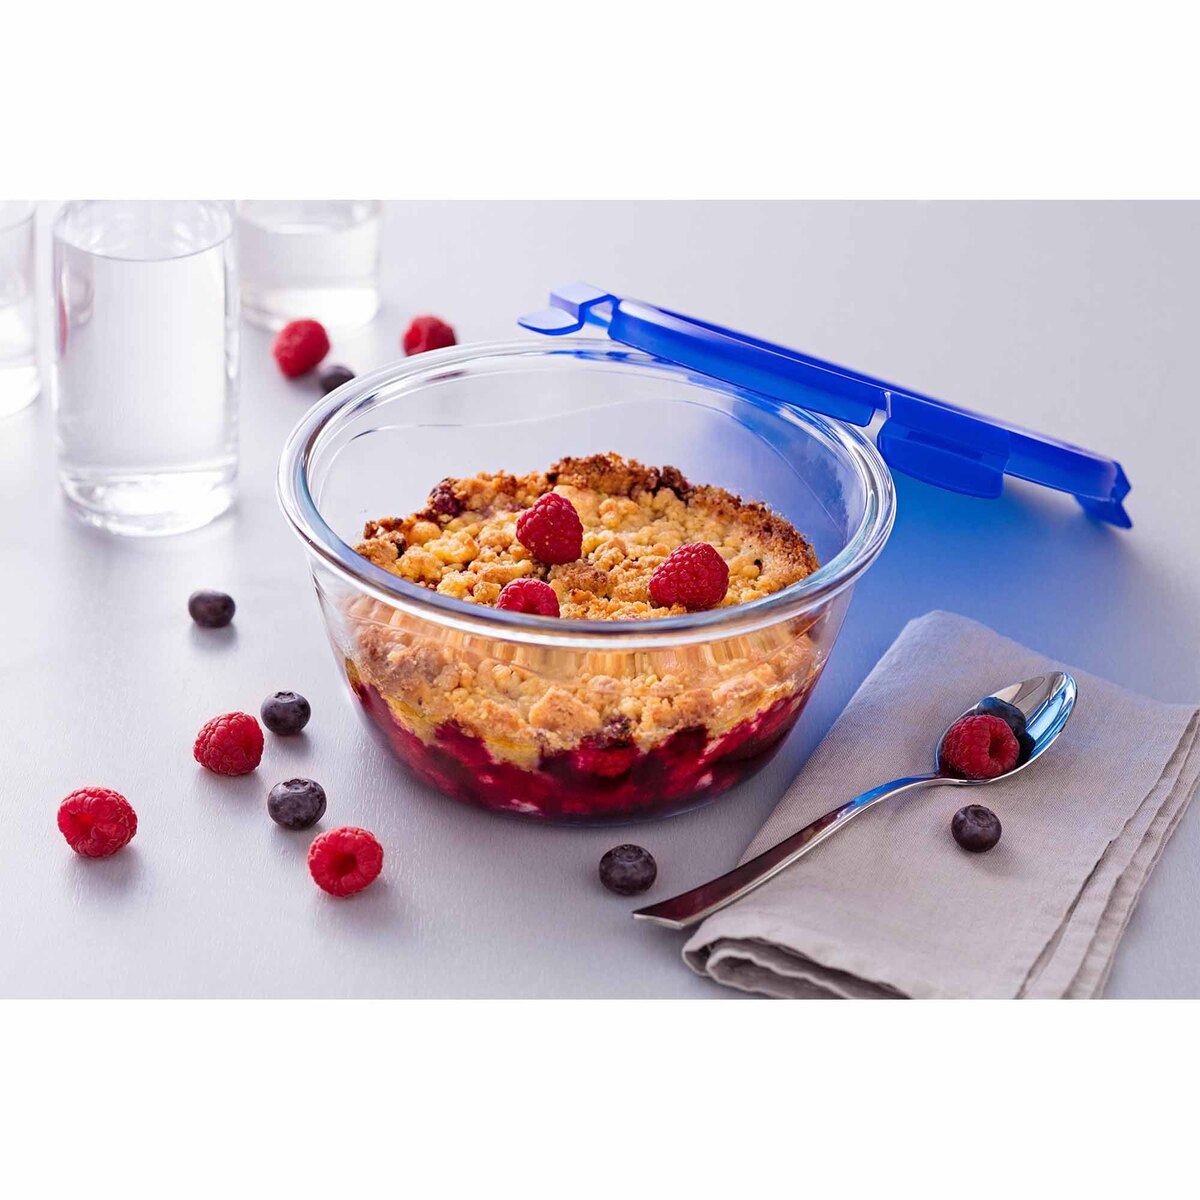 Pyrex Round Dish with Lid, 1.6 L, 19 cm, 288PG00